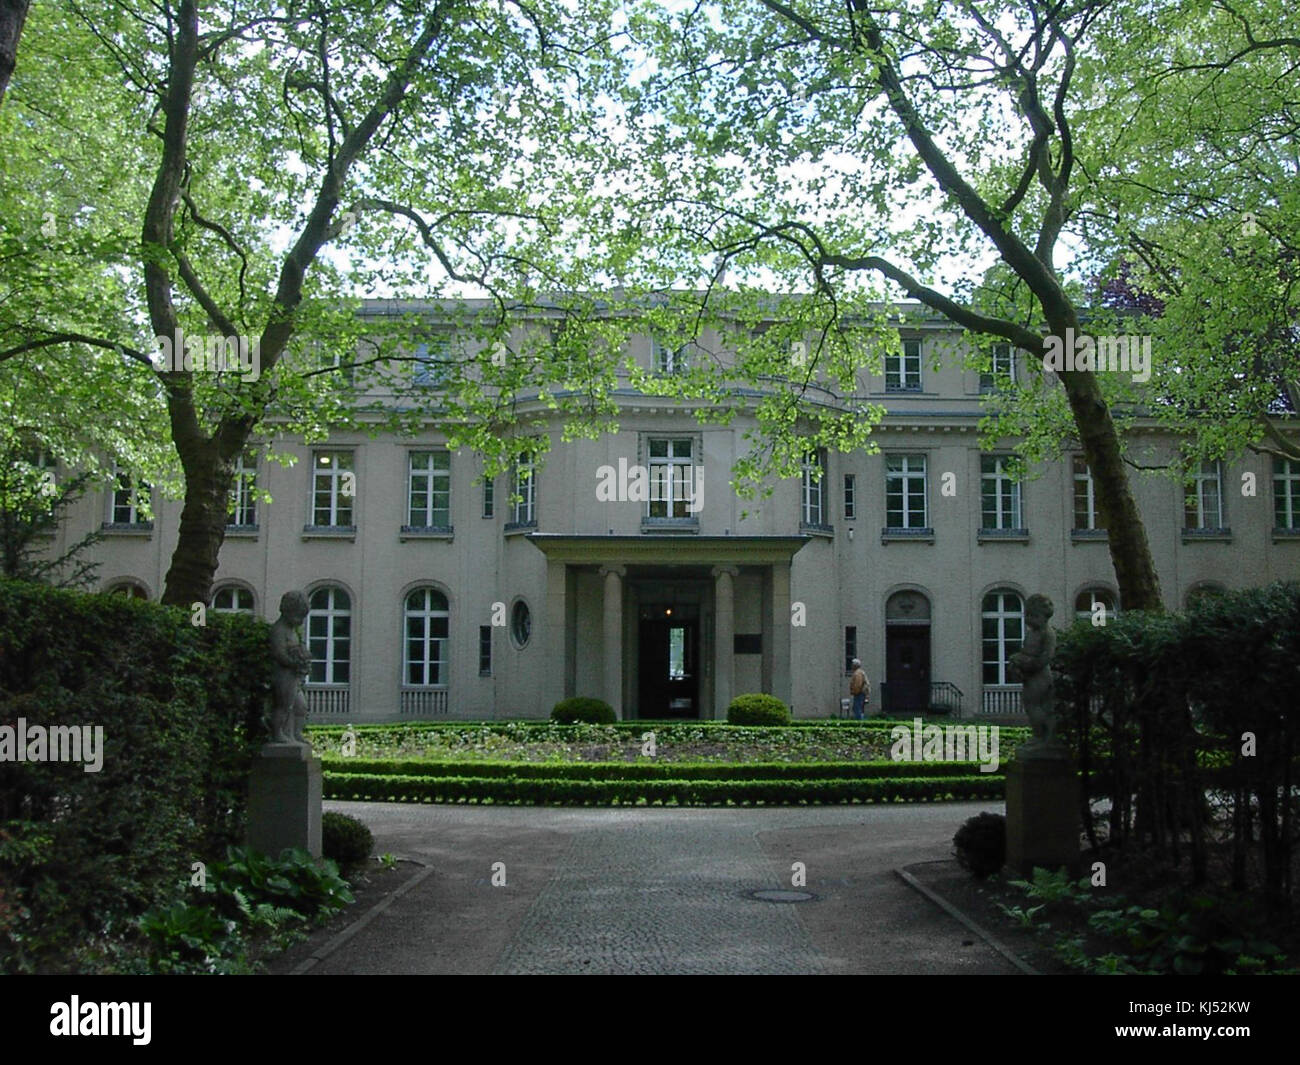 Wannsee Conference Villa picture 4589 Stock Photo